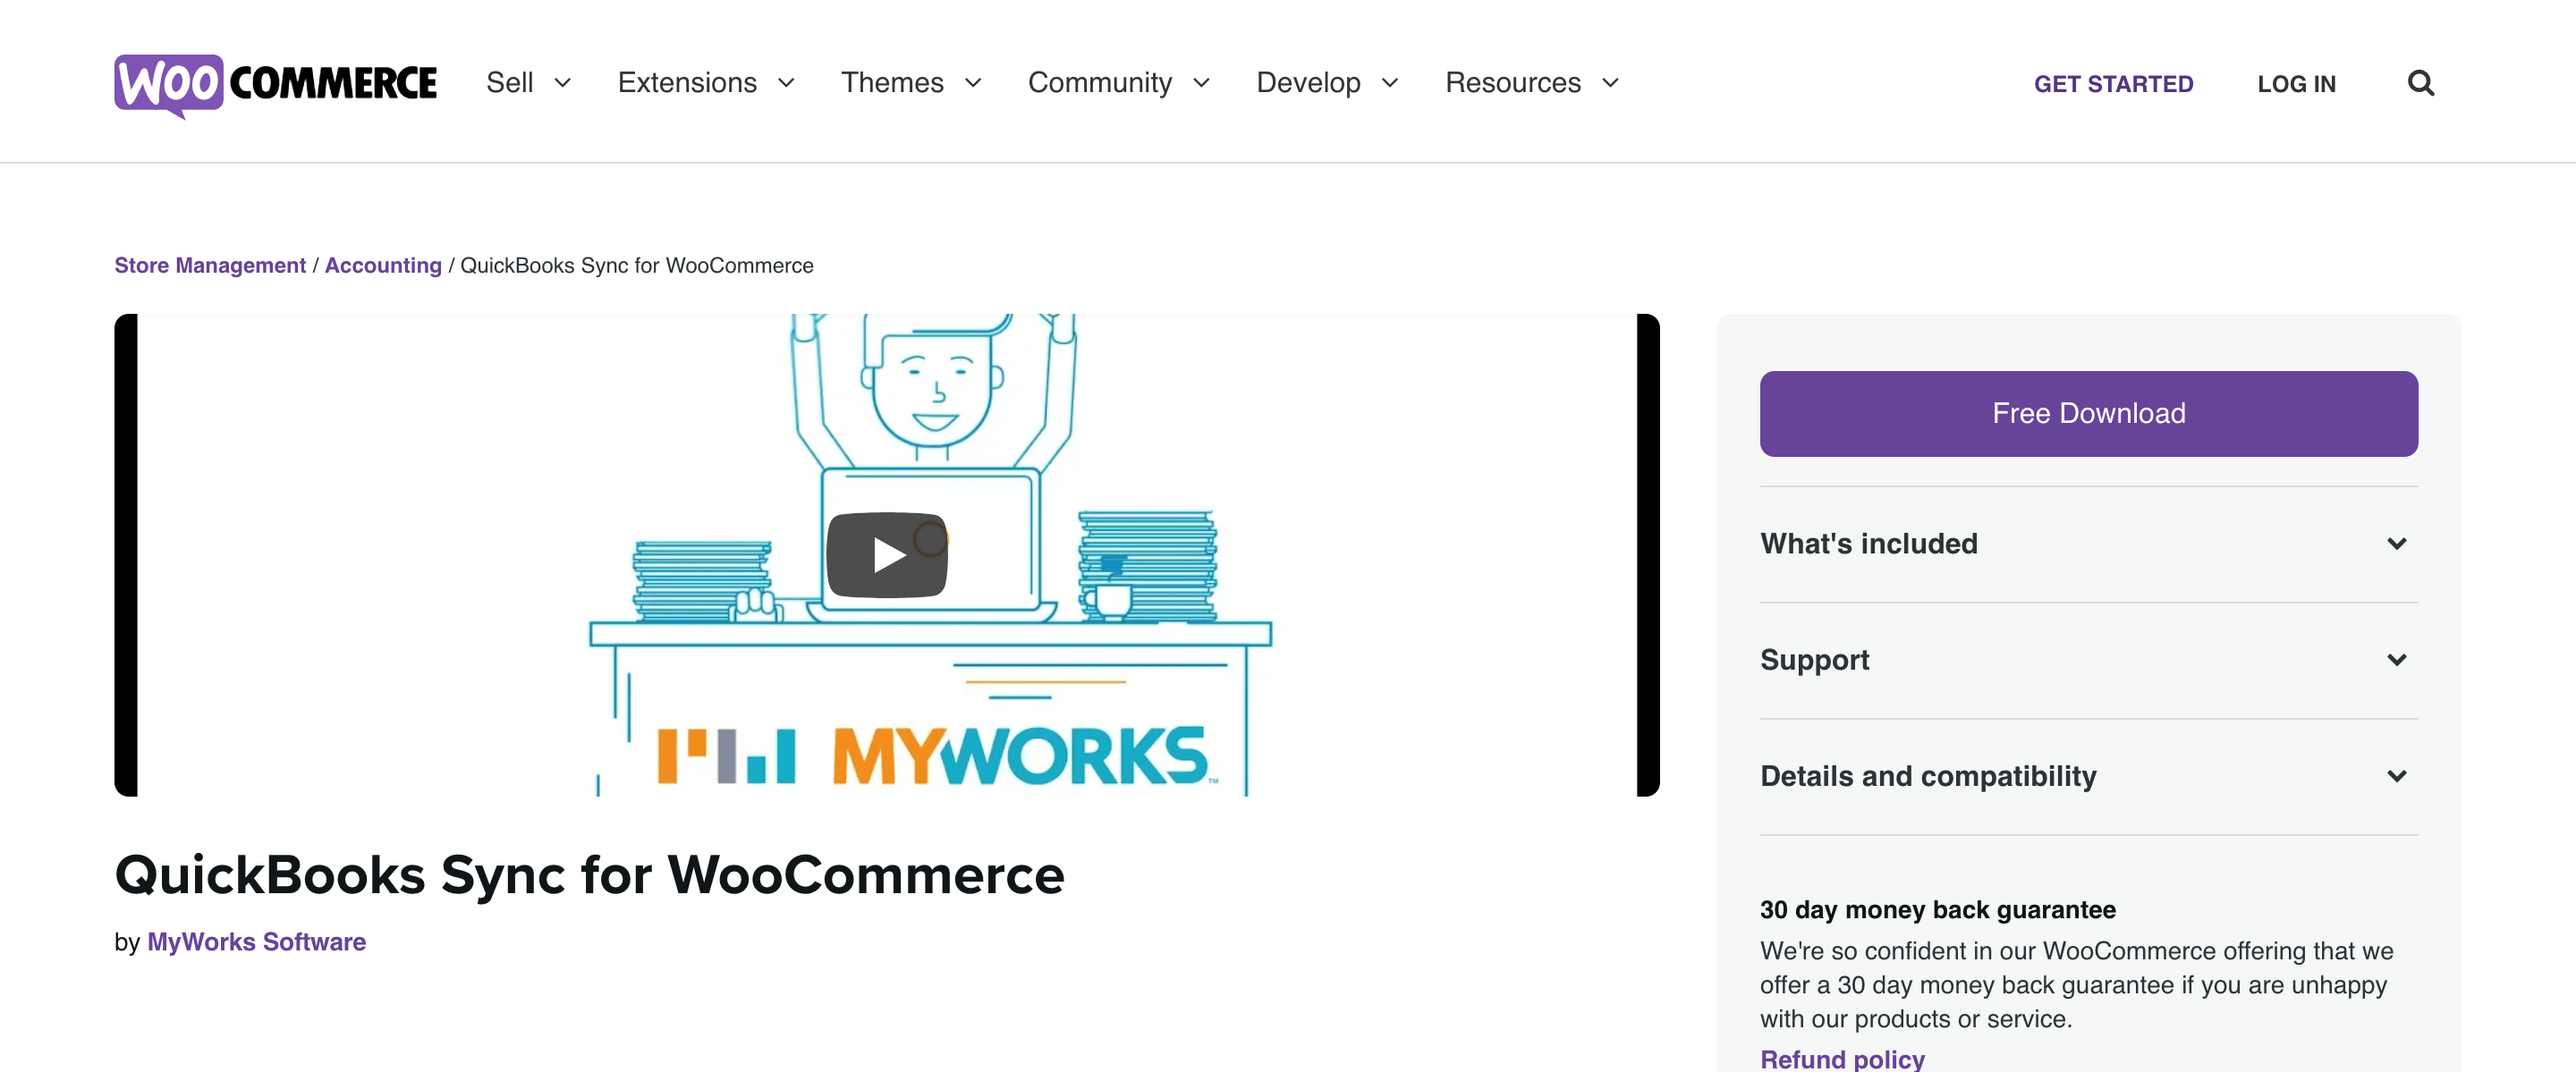 MyWorks’s QuickBooks Sync for WooCommerce